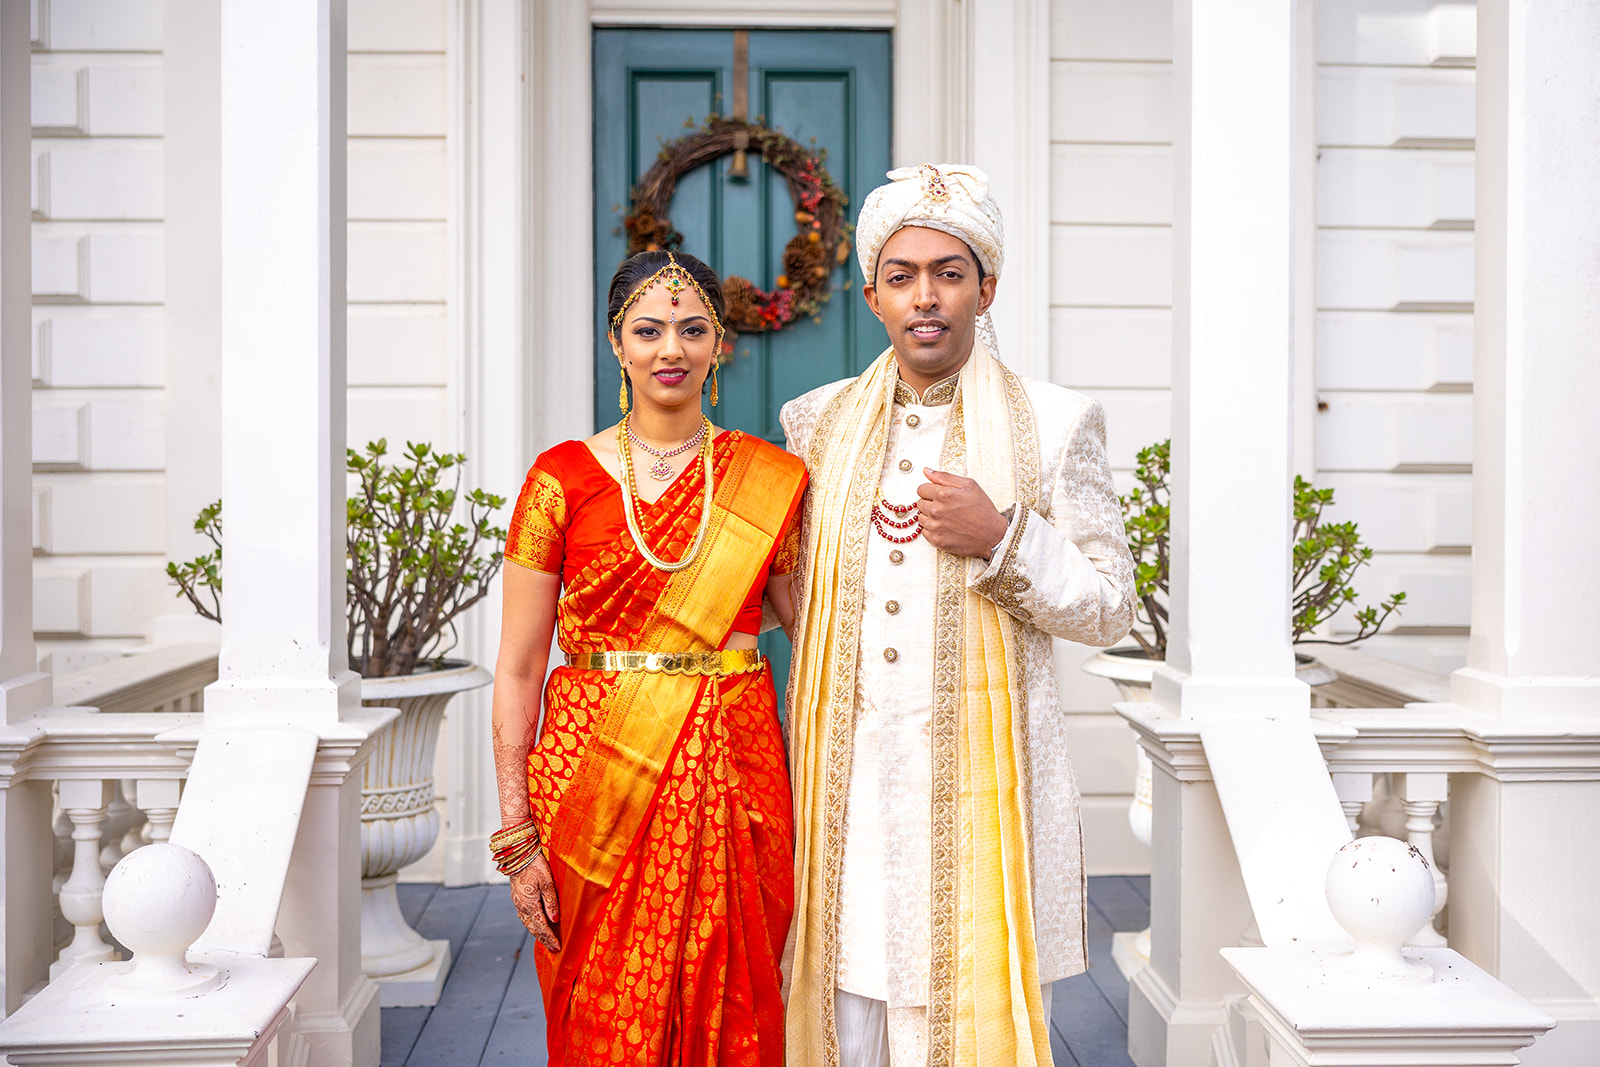 Rengstorff house, one of the best Bay Area Indian Wedding Venues provides backdrop for bride and groom pre-wedding.